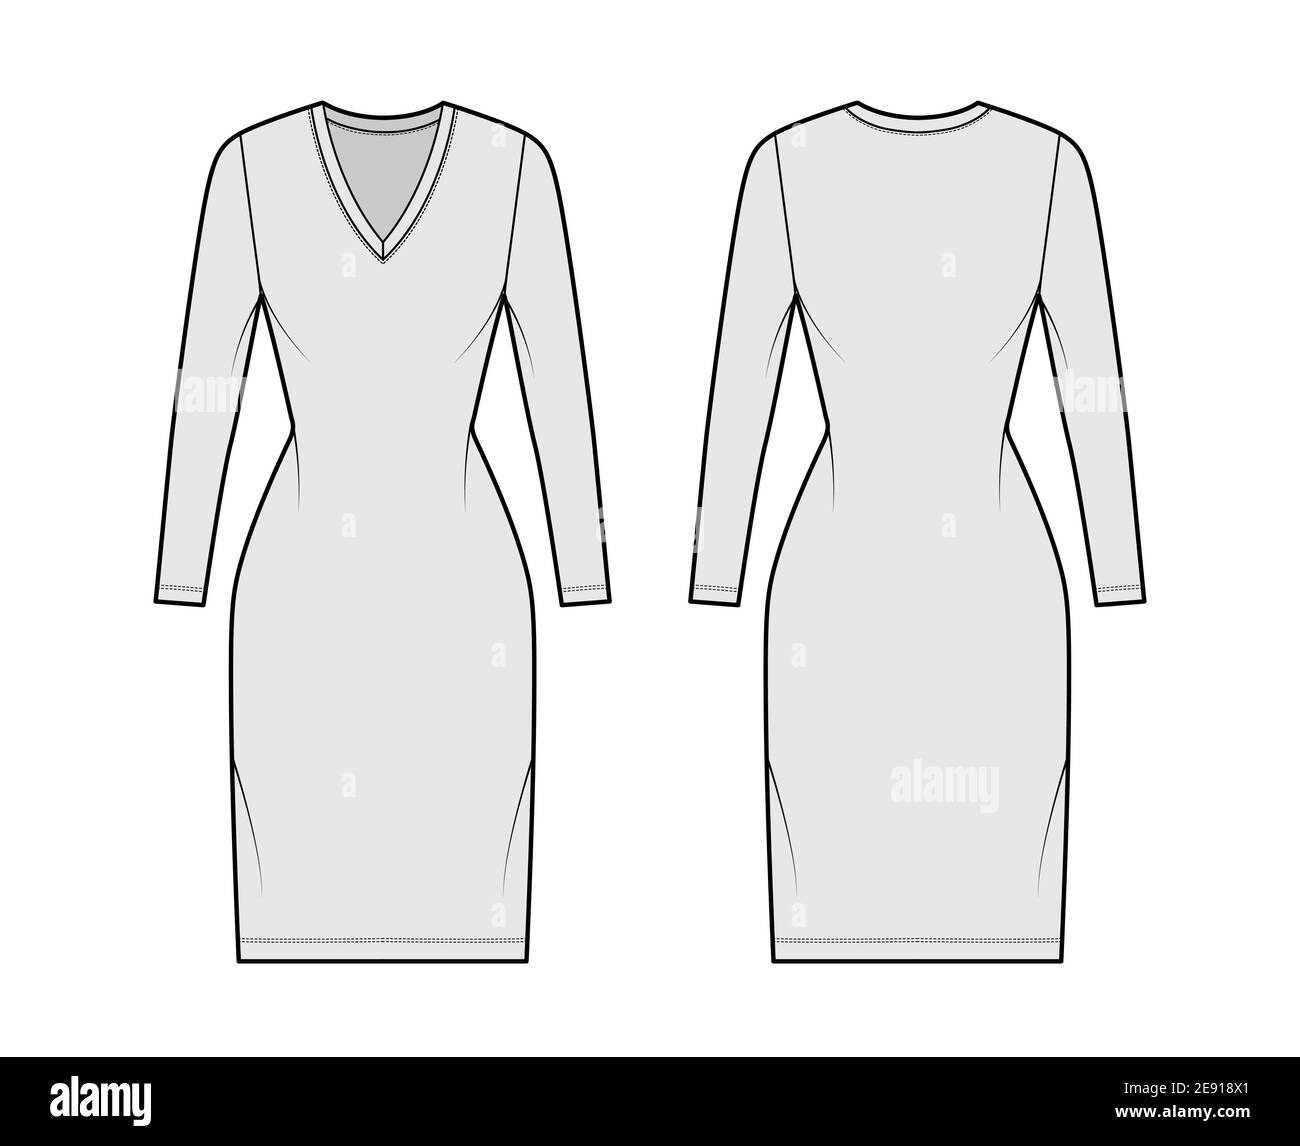 T-shirt dress technical fashion illustration with V-neck, long sleeves, knee length, fitted body, Pencil fullness. Flat apparel template front, back, grey color. Women, men, unisex CAD mockup Stock Vector